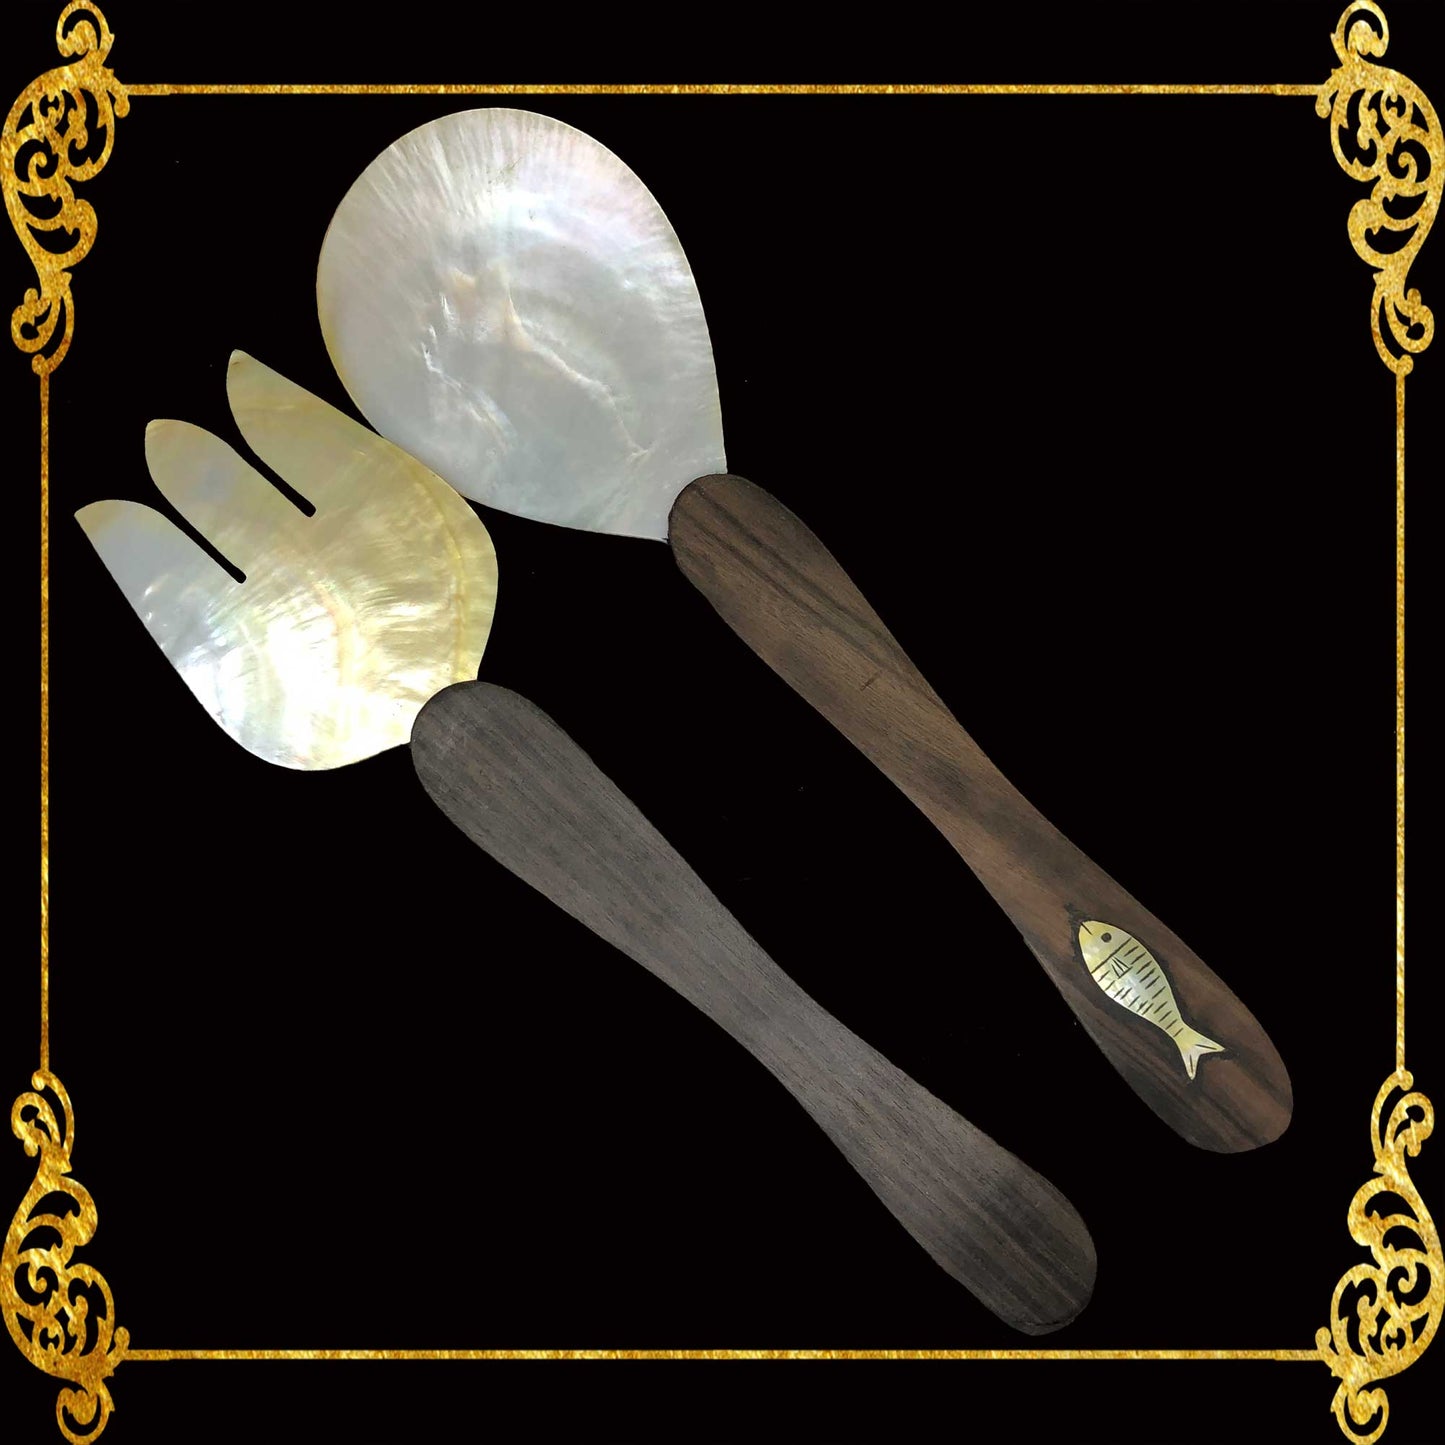 Spoon and Fork Seashells with Wooden Handle